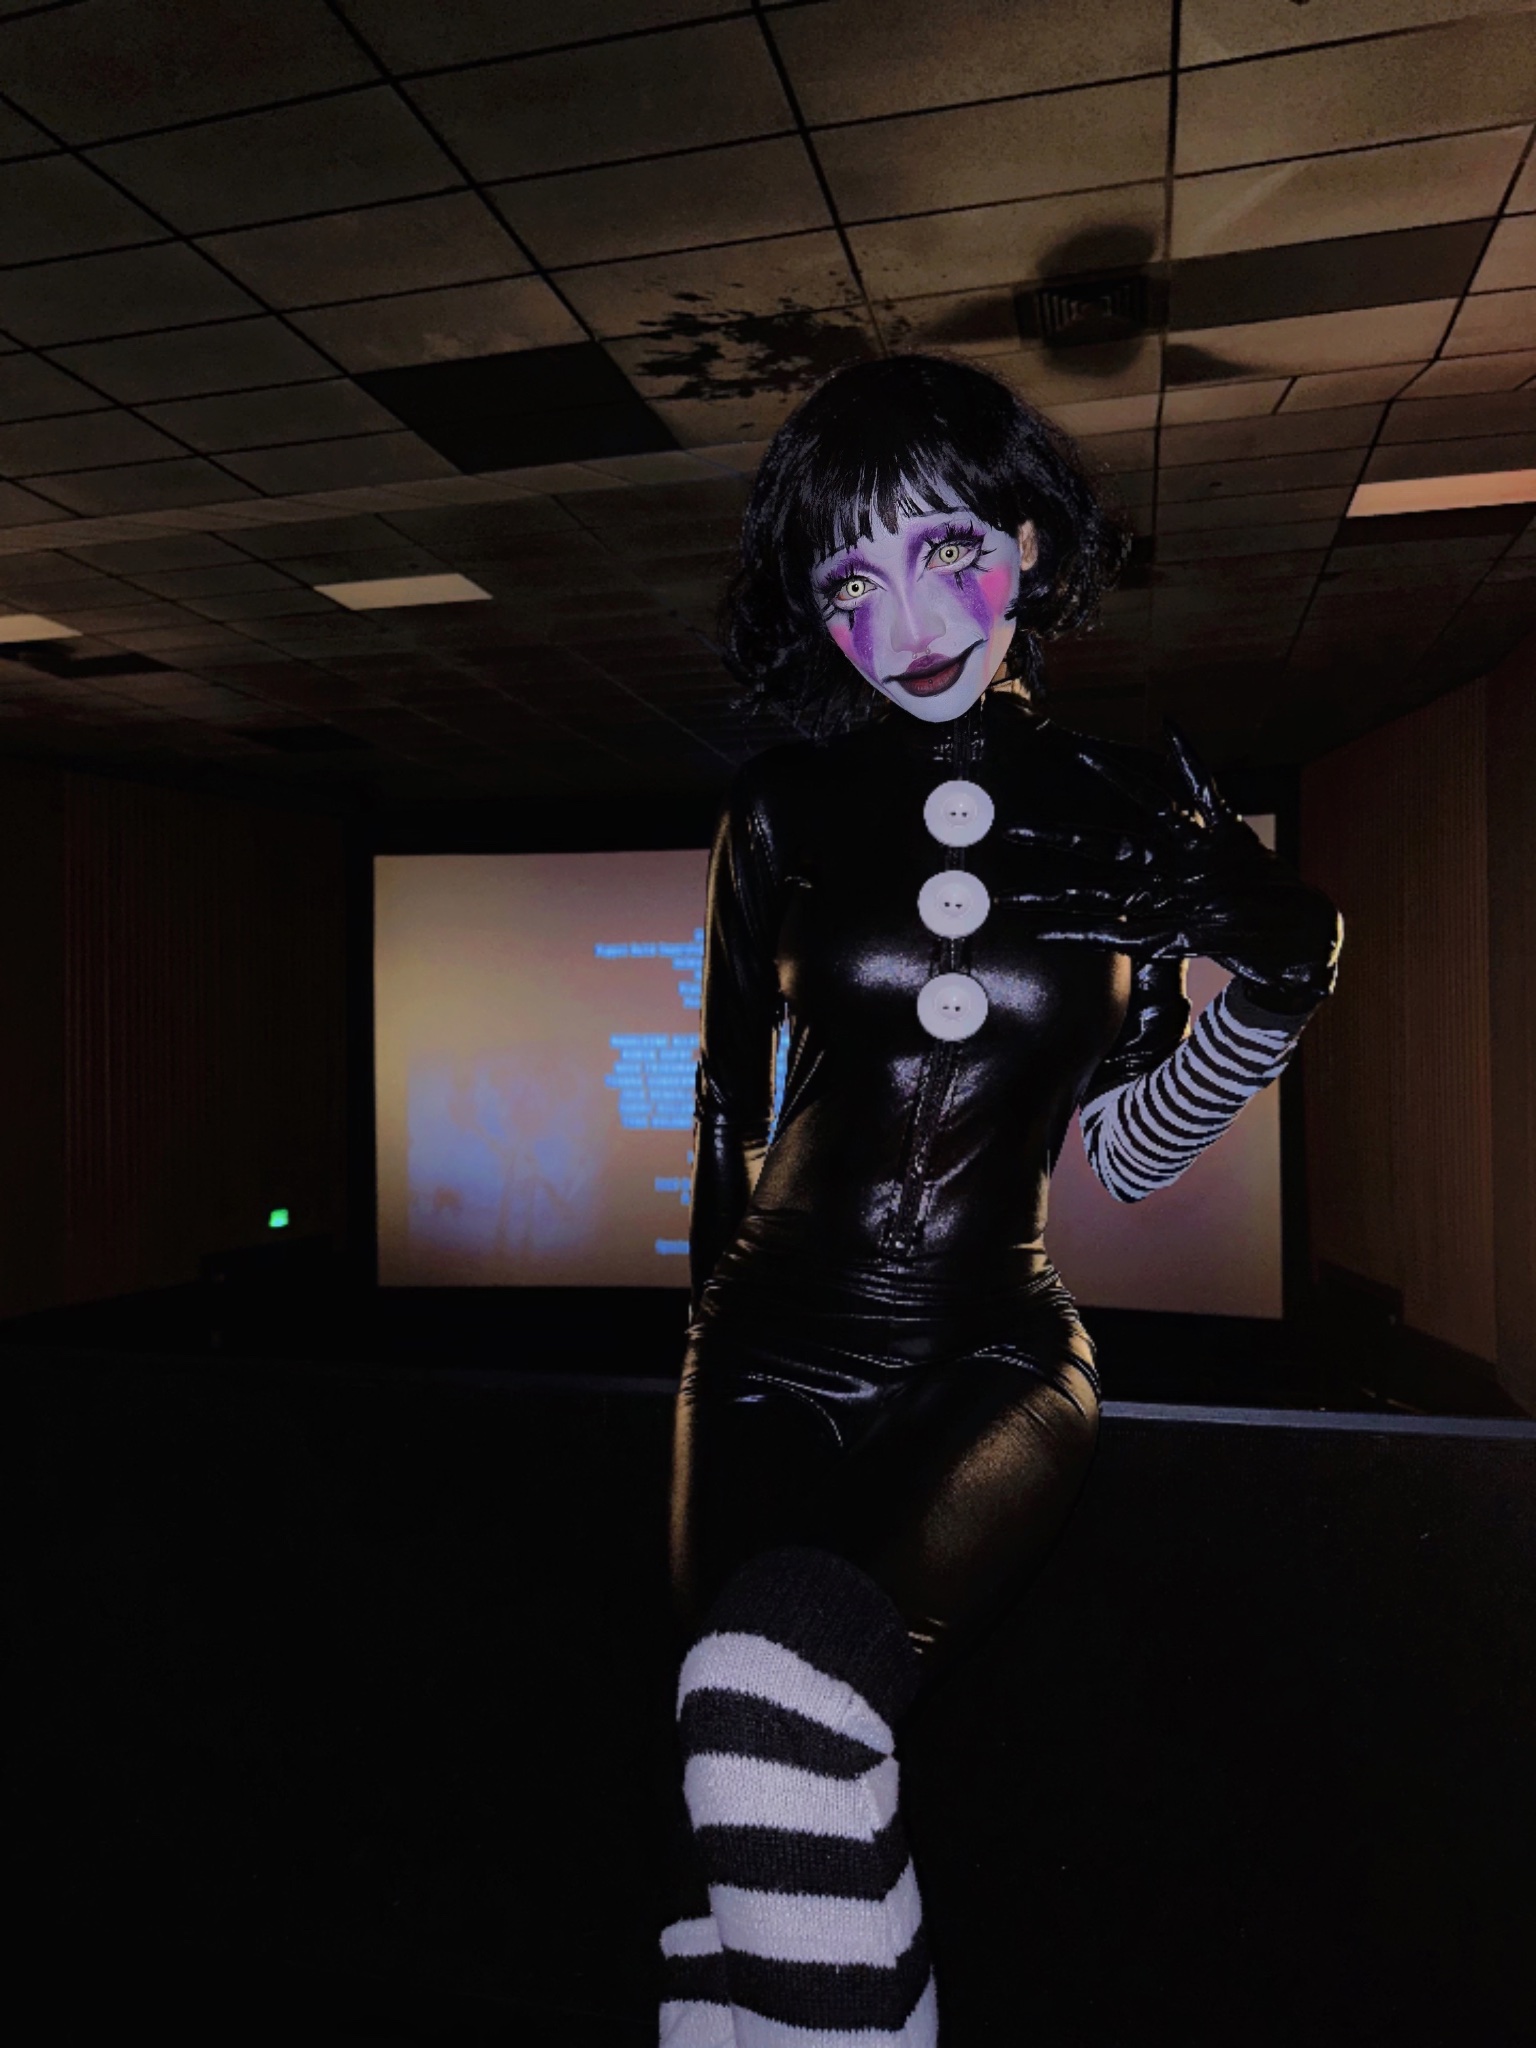 Marionette/The Puppet (Five Nights at Freddy's) Costume for Cosplay &  Halloween 2023